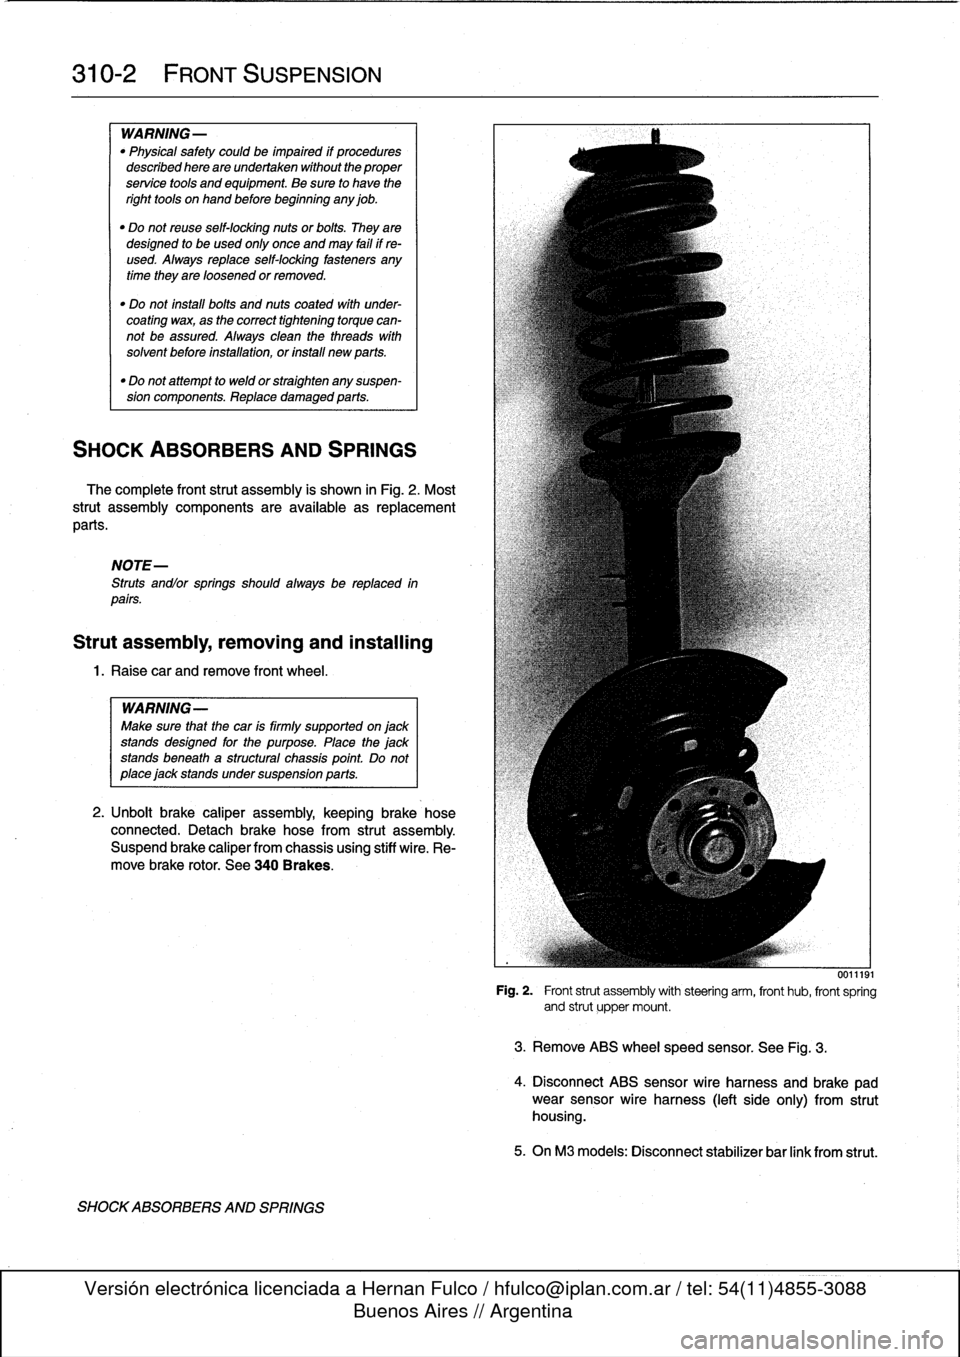 BMW 328i 1994 E36 User Guide 
310-2

	

FRONT
SUSPENSION

WARNING-

"
Physical
safety
could
be
impaired
if
procedures
described
here
areundertaken
without
the
proper
service
tools
and
equipment
.
Be
sure
to
have
the
right
tools
o